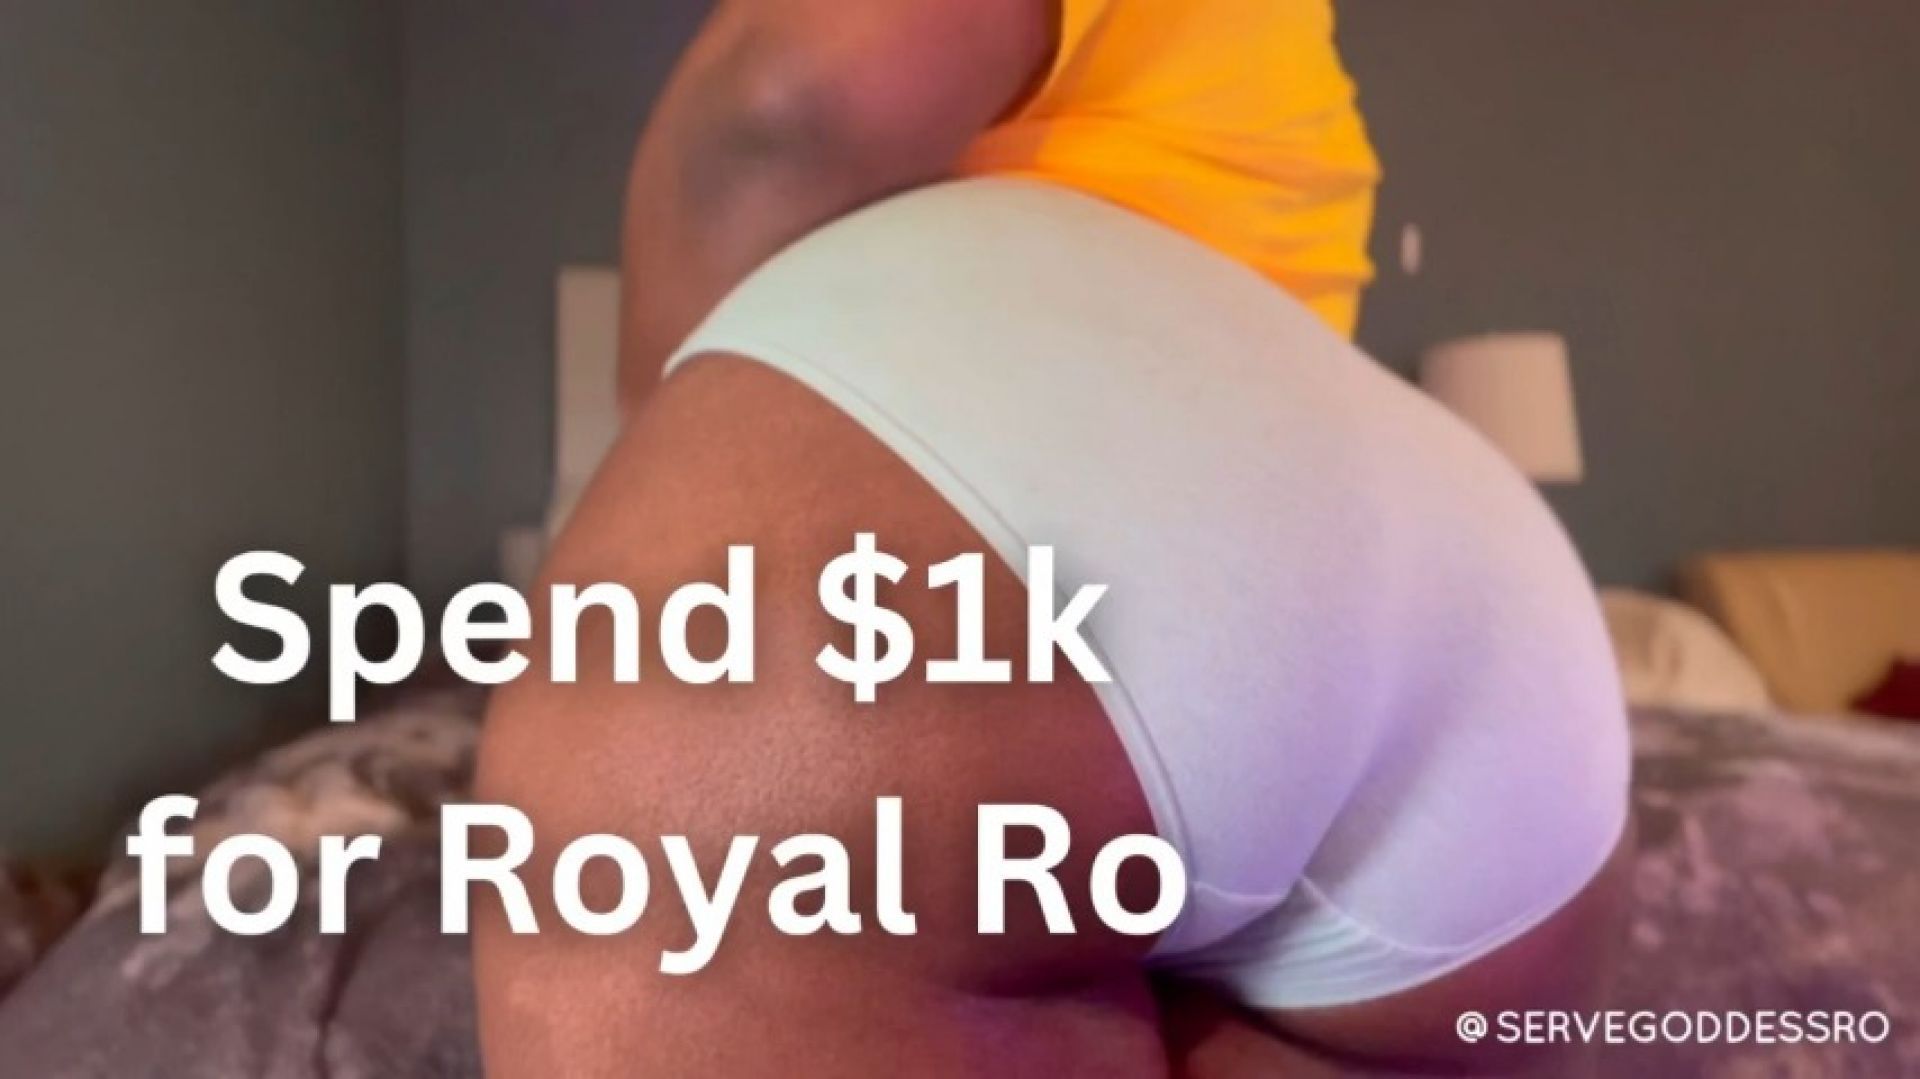 Spend $1k for Royal Ro